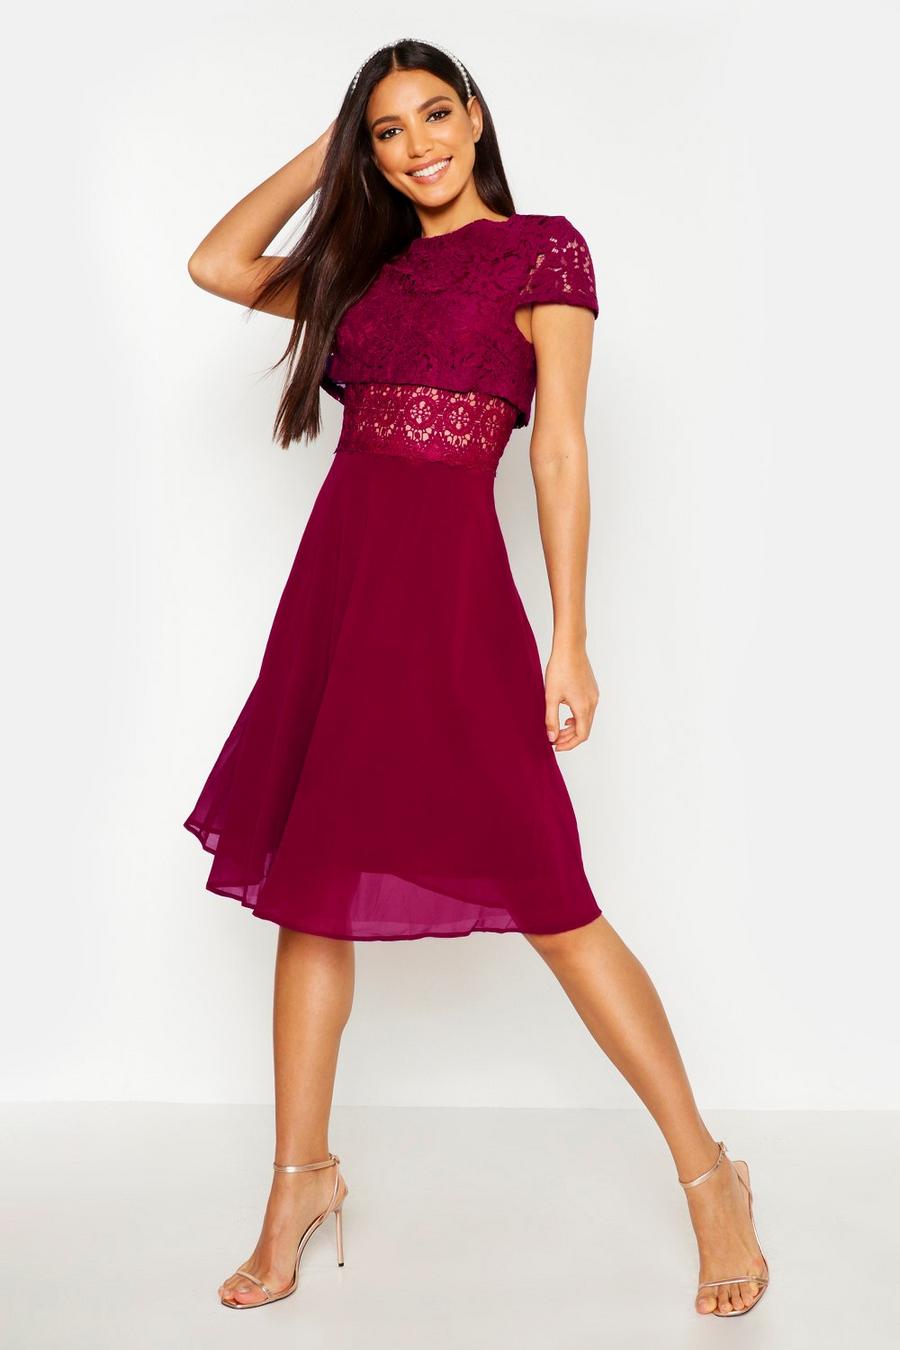 Berry rouge Lace Top Chiffon Skater Dress